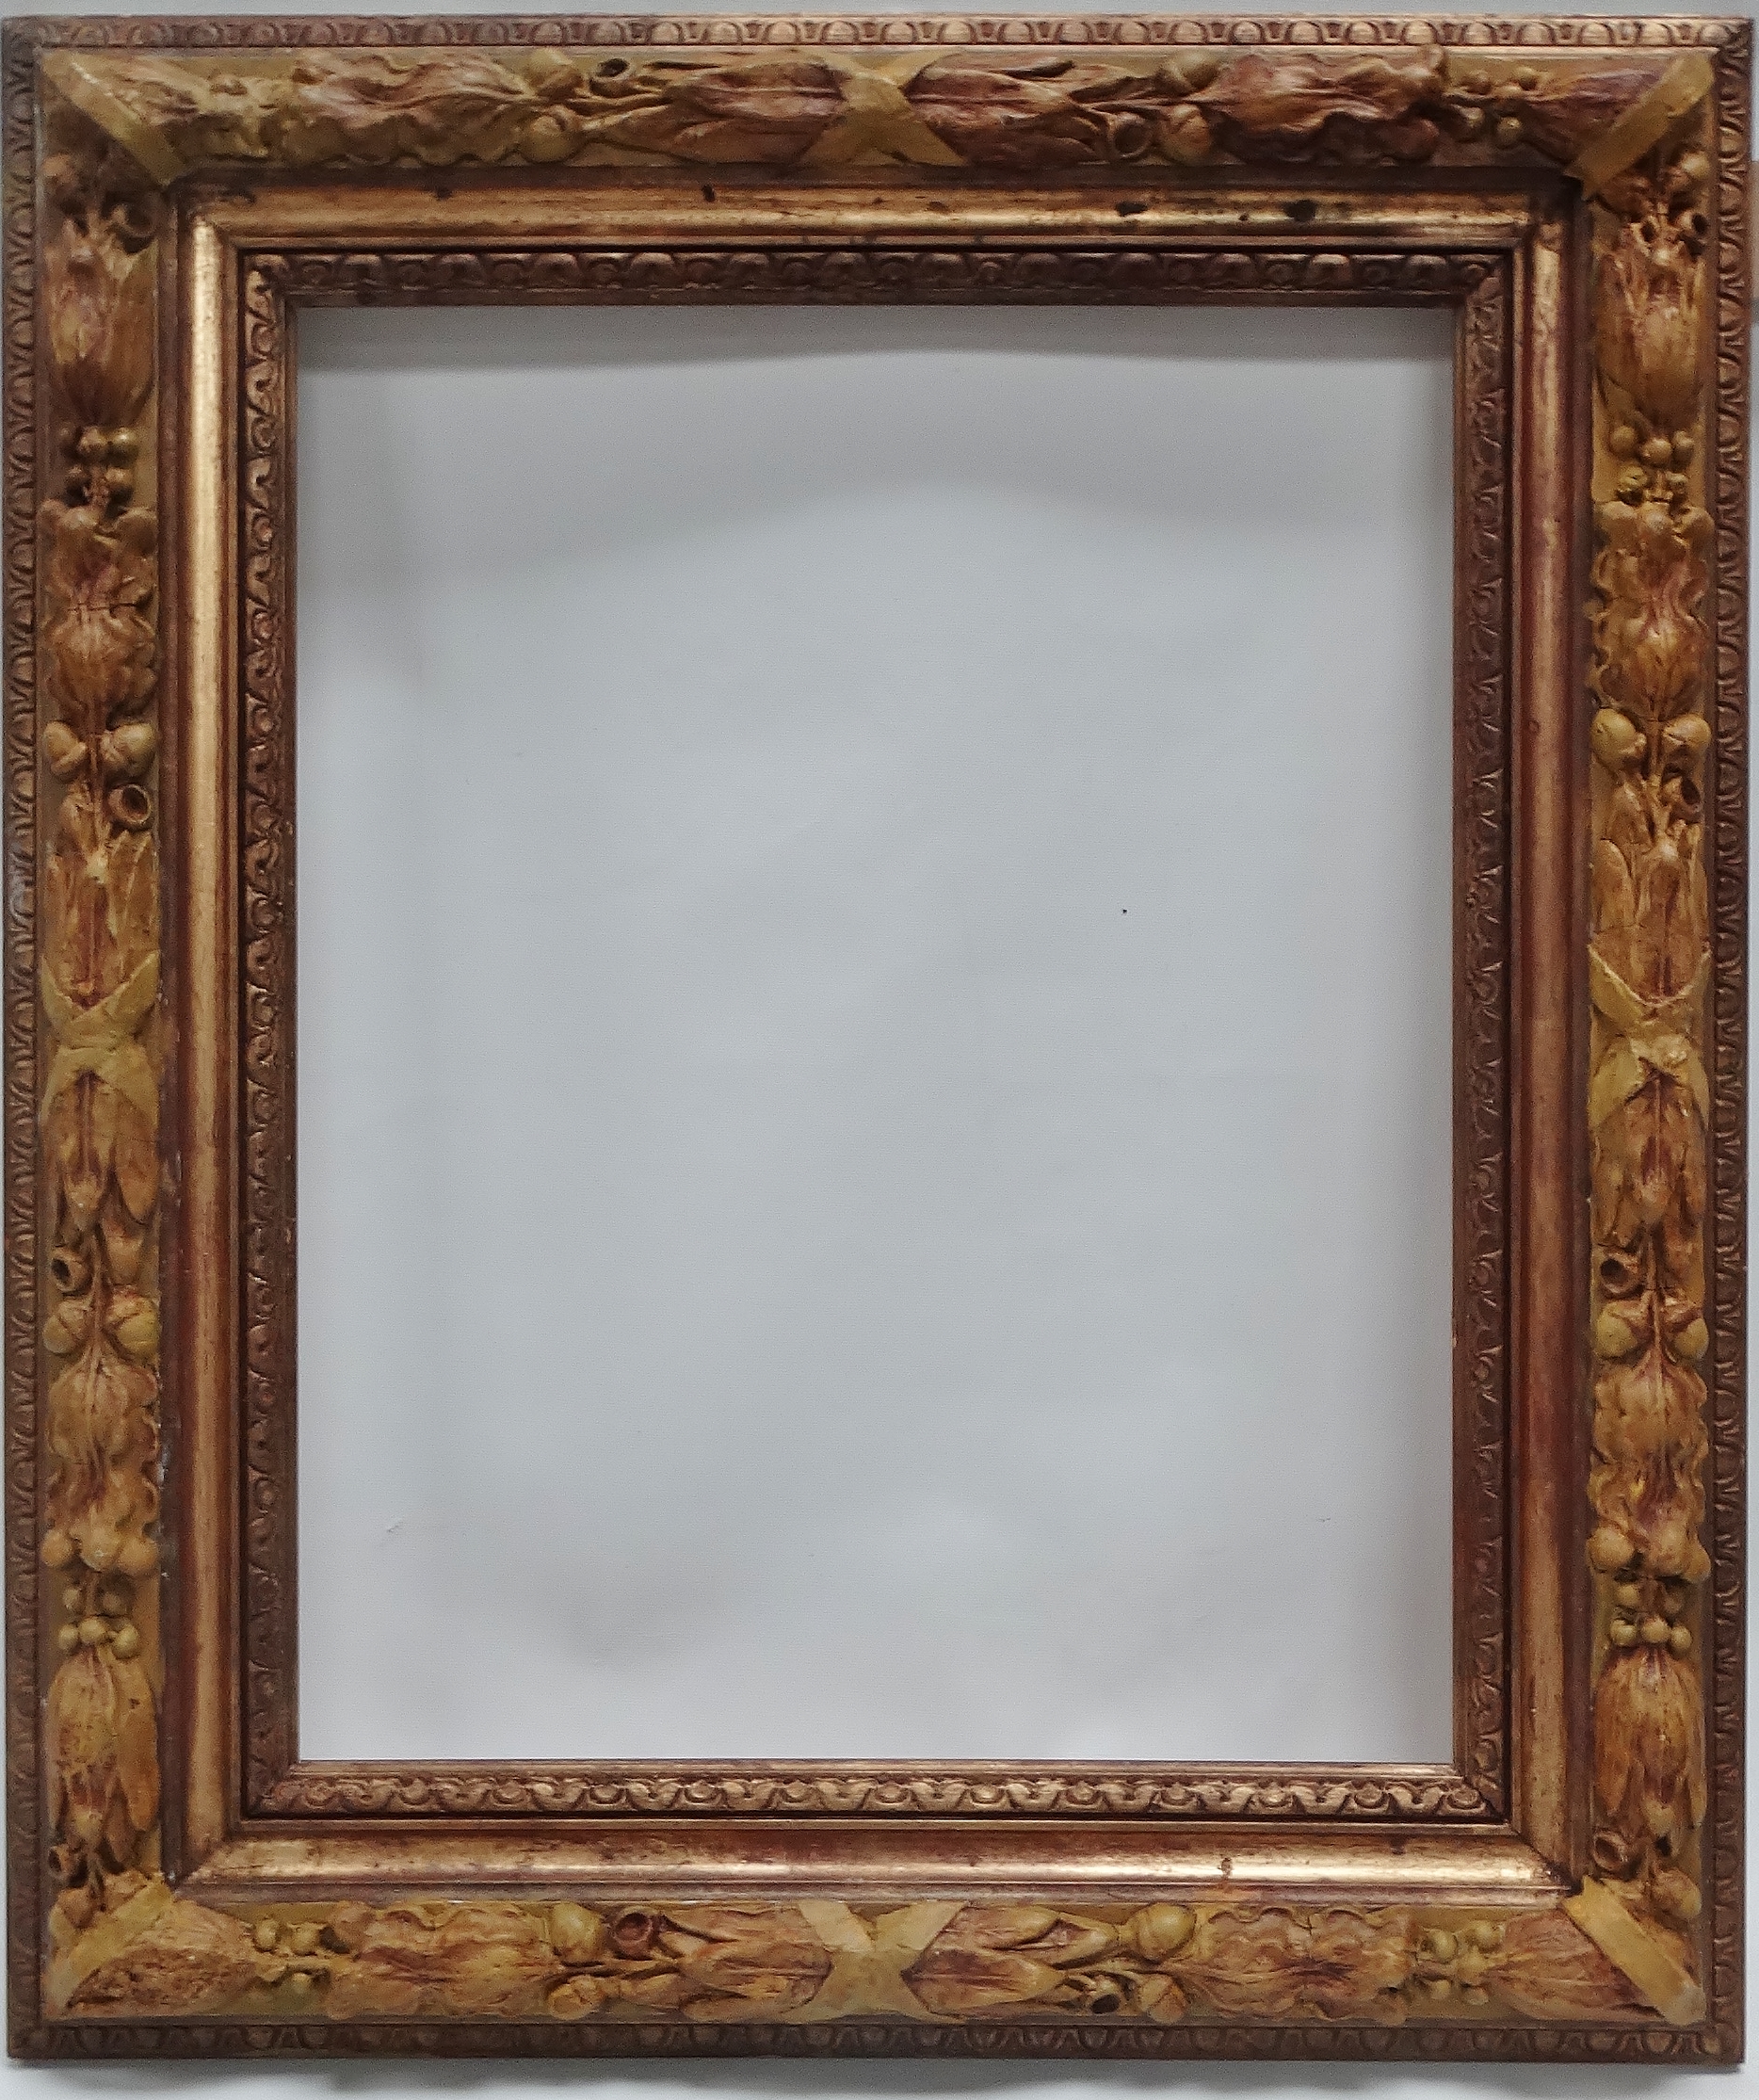 A mid XX relief and gilt frame - An unusual ribbon, laurel and oak frame with gilt egg and dart